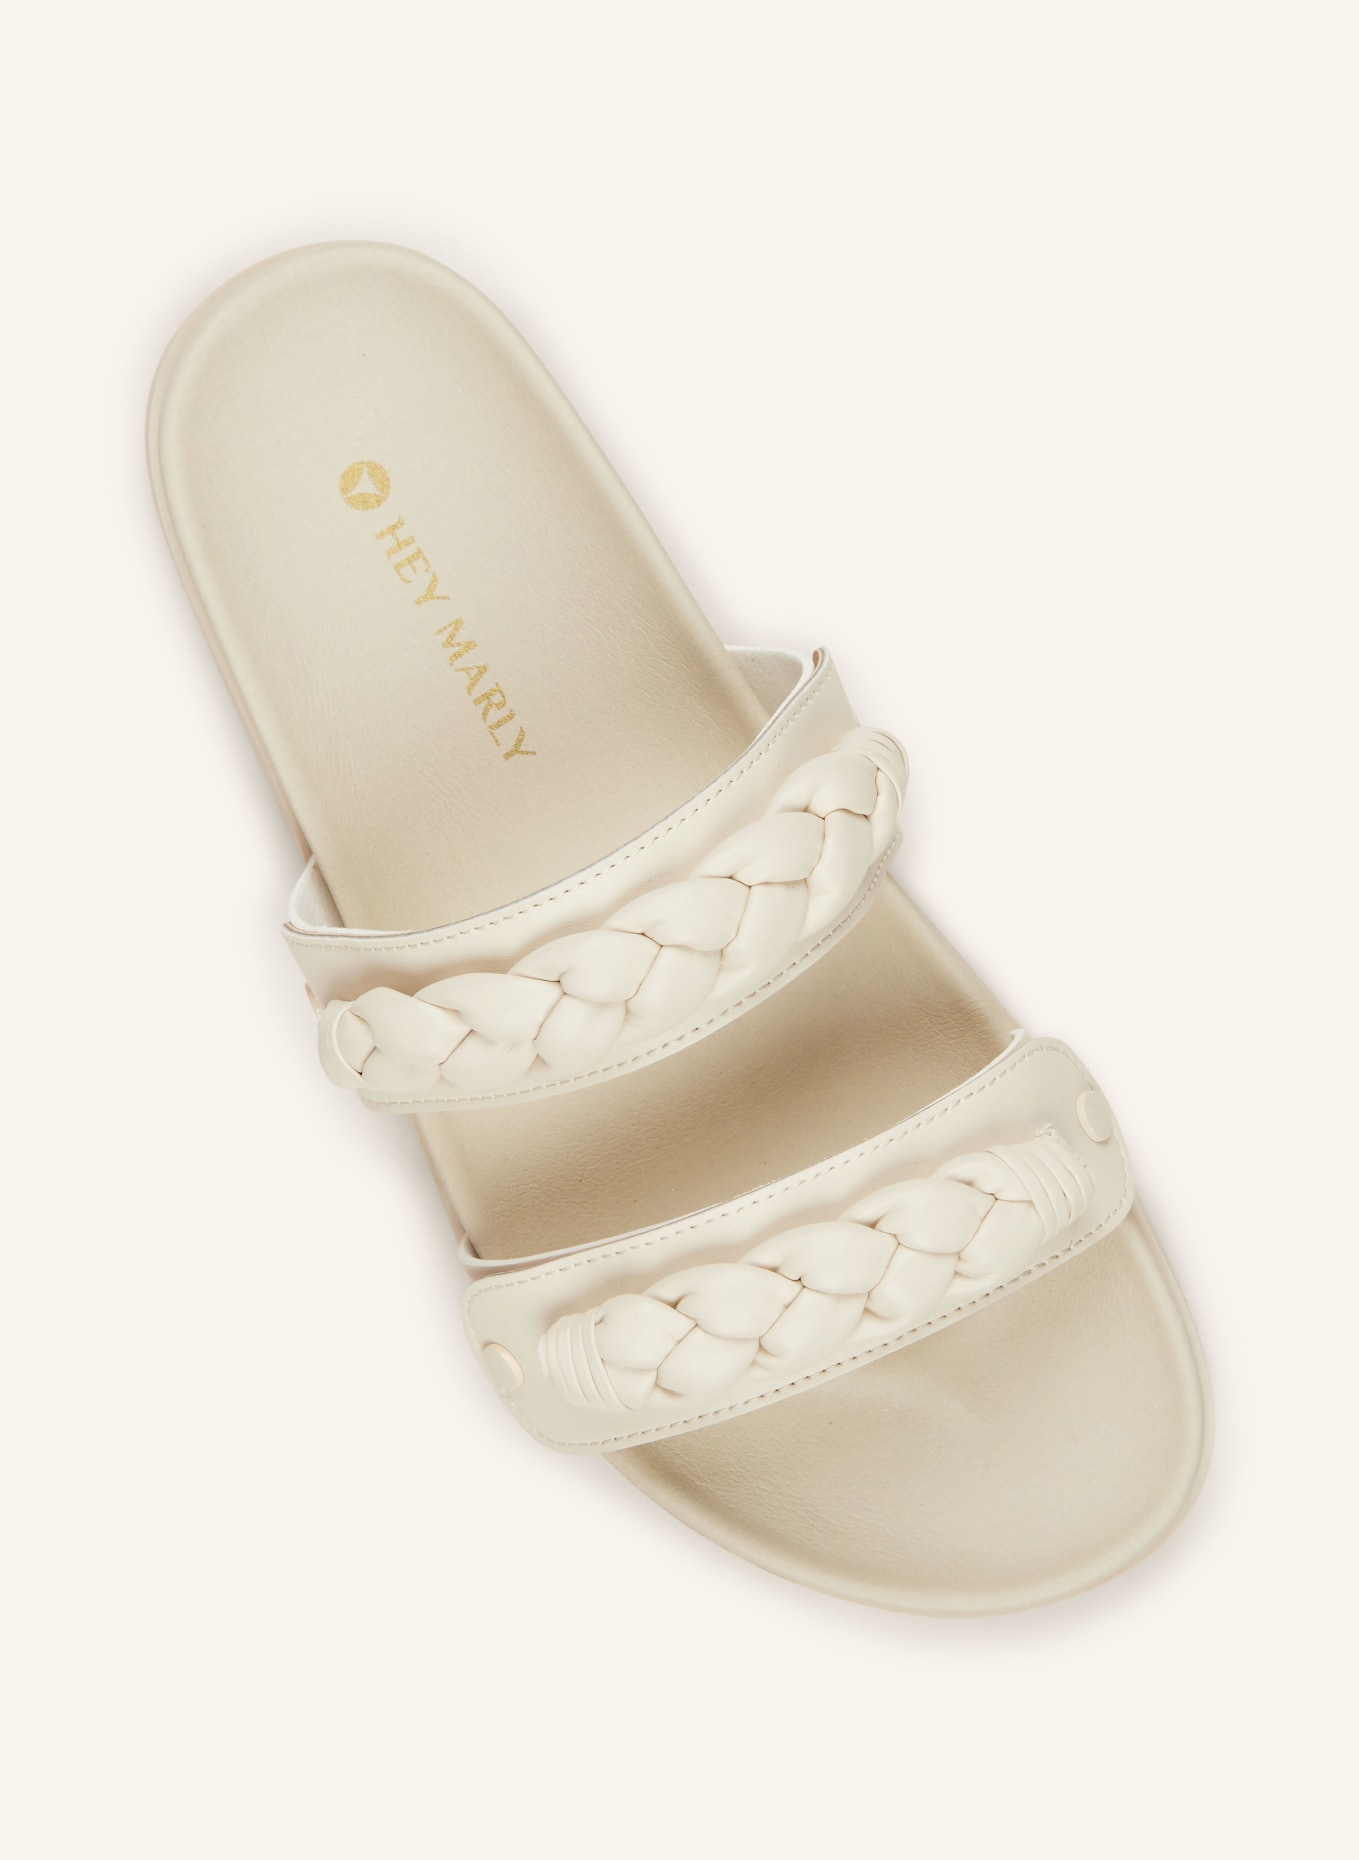 HEY MARLY Sandal upper BRAIDED, Color: CREAM (Image 2)